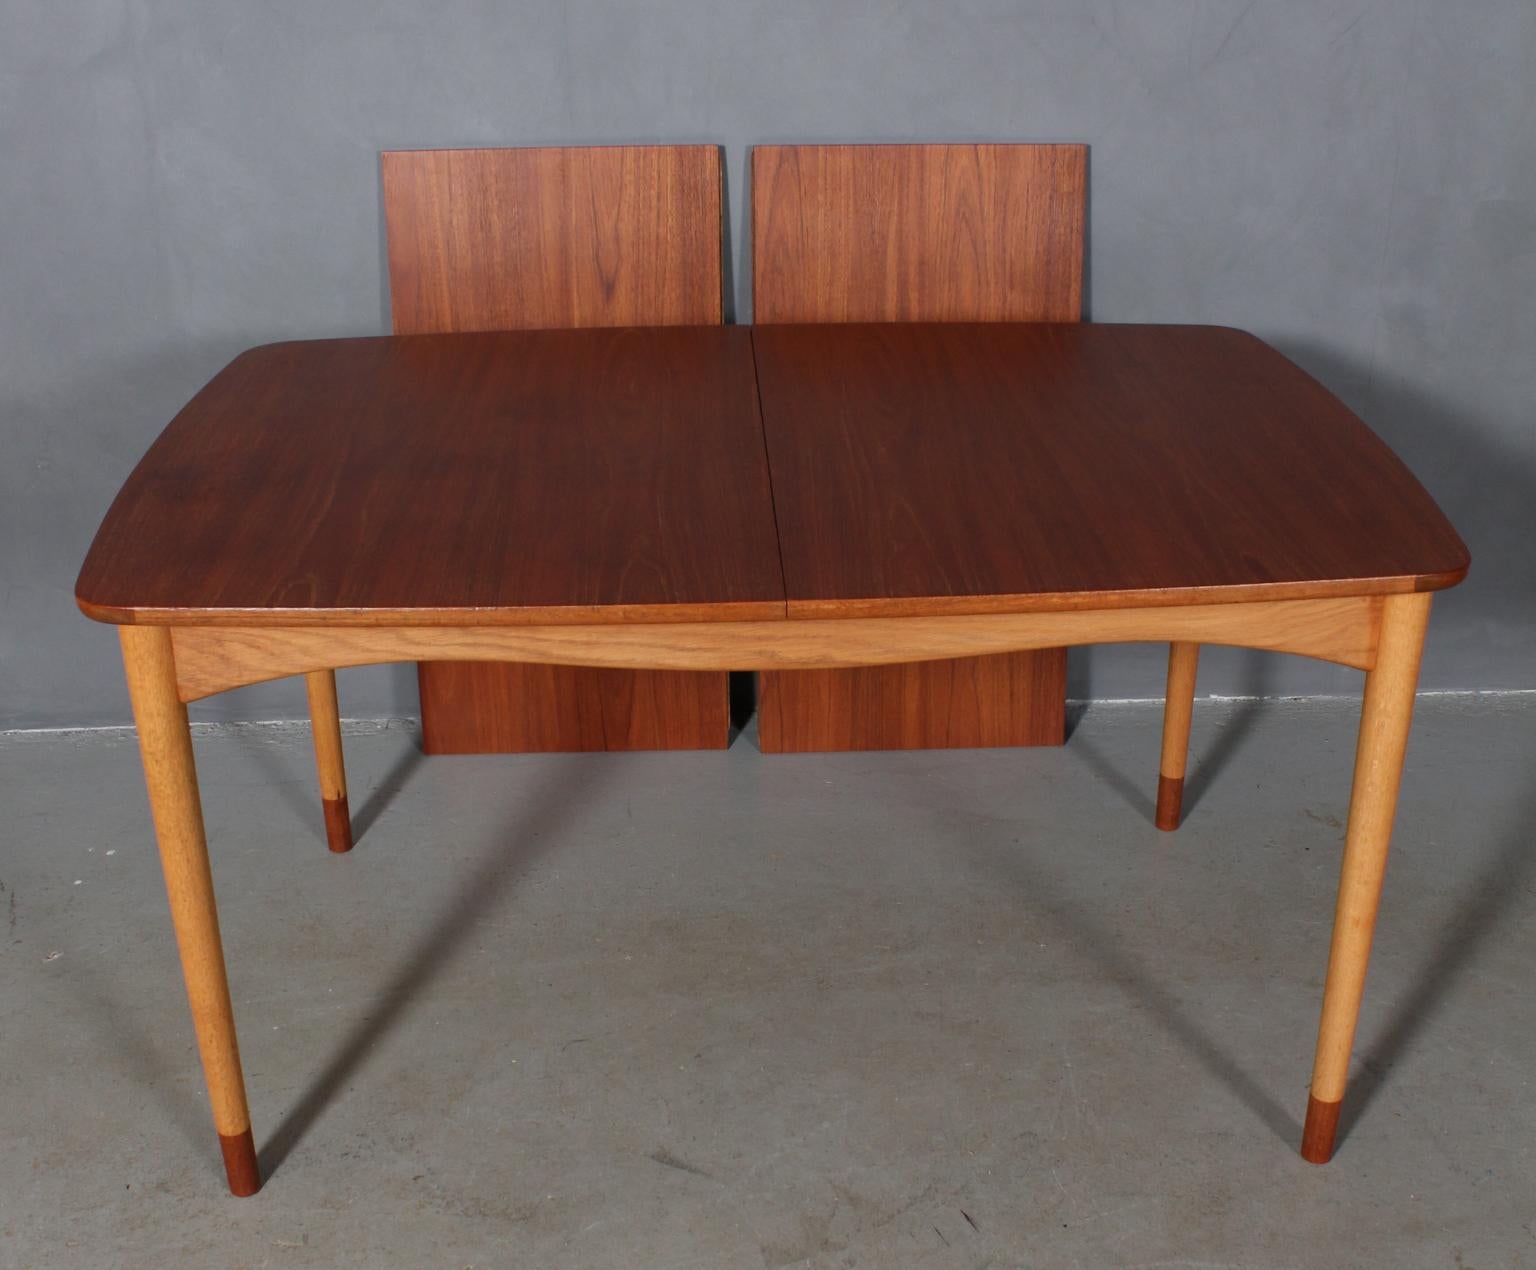 Finn Juhl dining table with extension leafes.

Made in partly solid teak and oak.

Made by Bovirke.